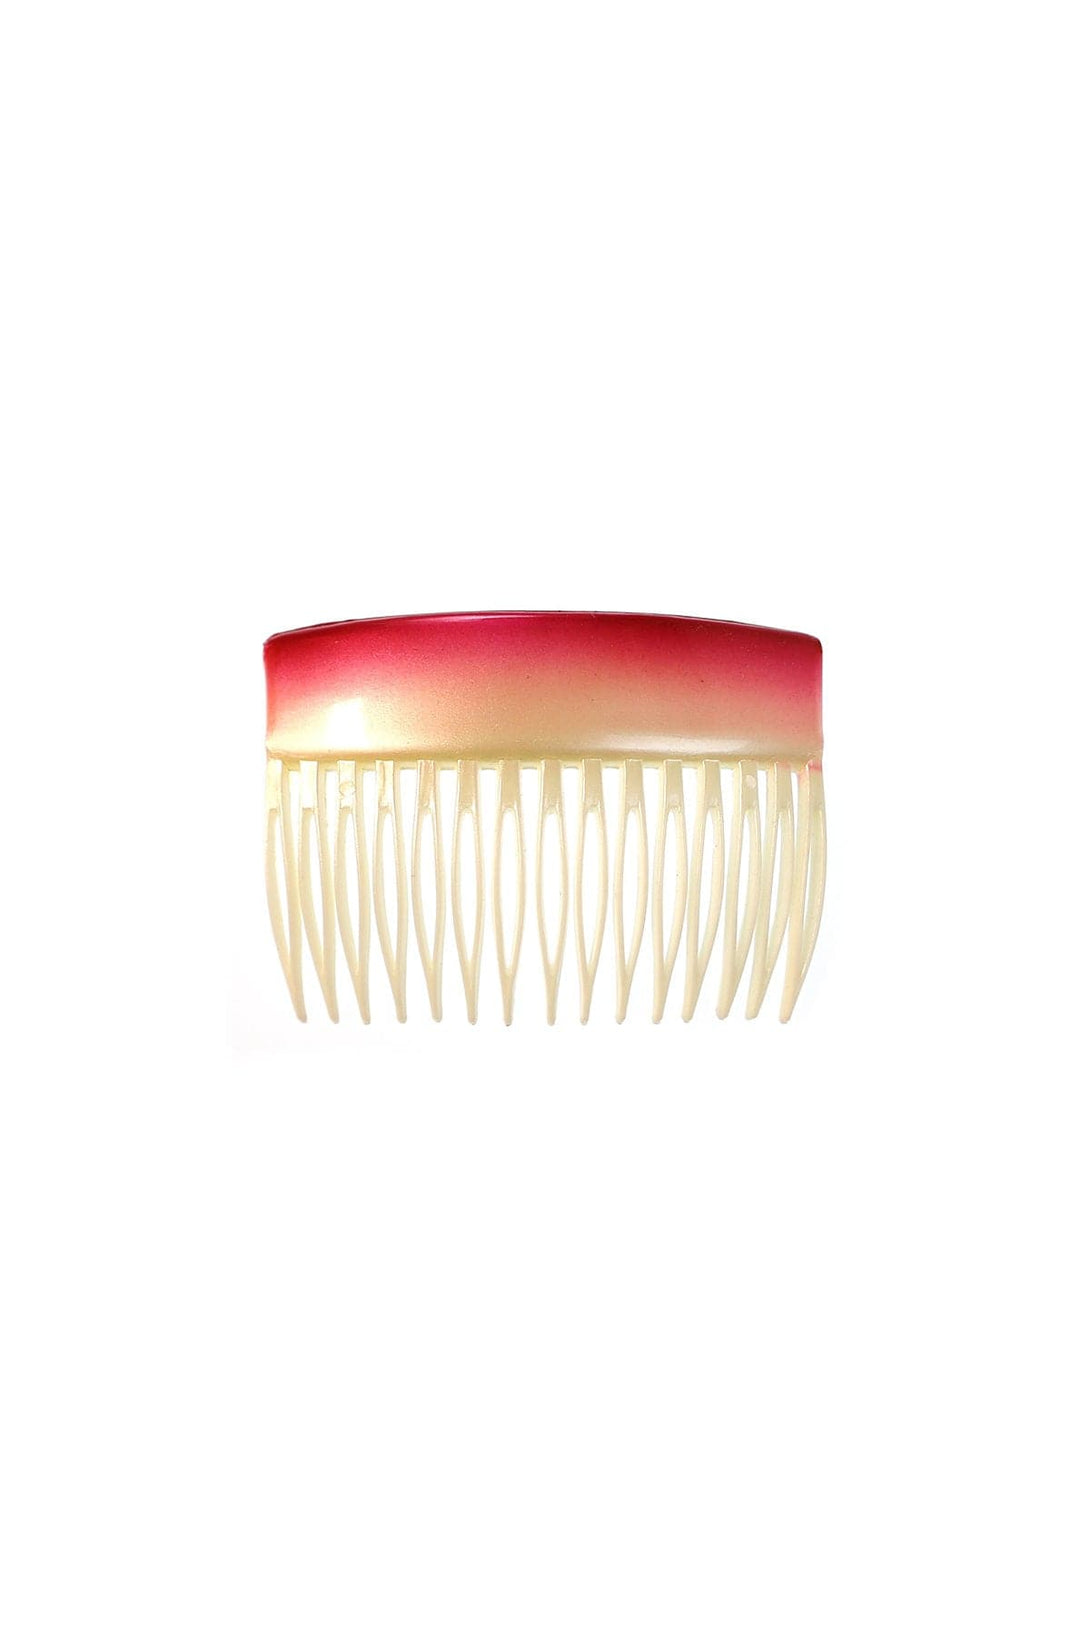 Vintage French Sunrise Hair Comb